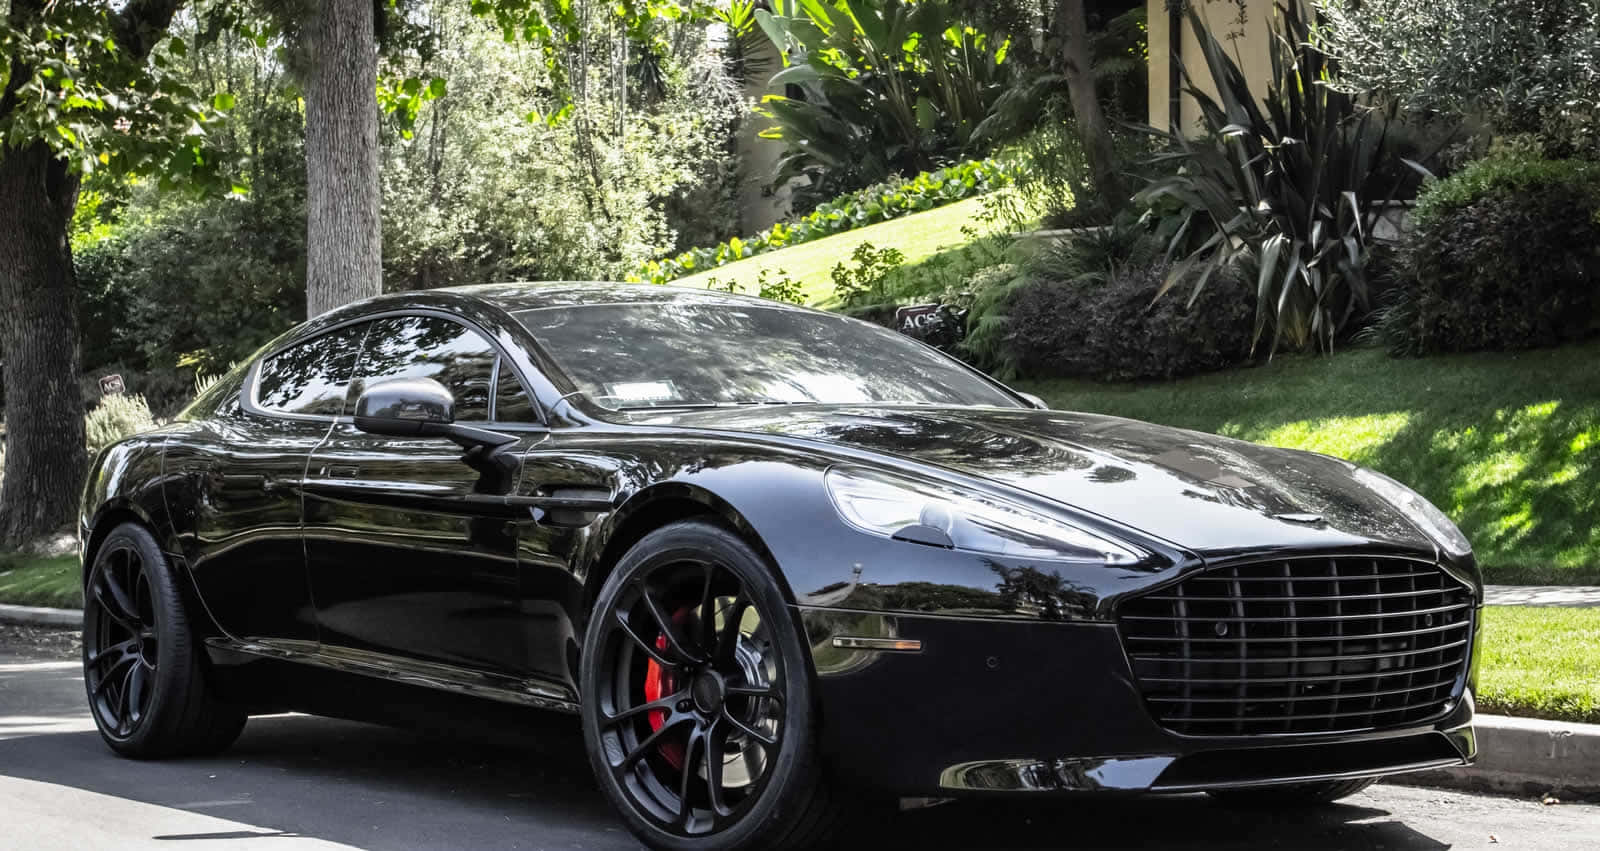 A Stunning Aston Martin Rapide S in Action Wallpaper